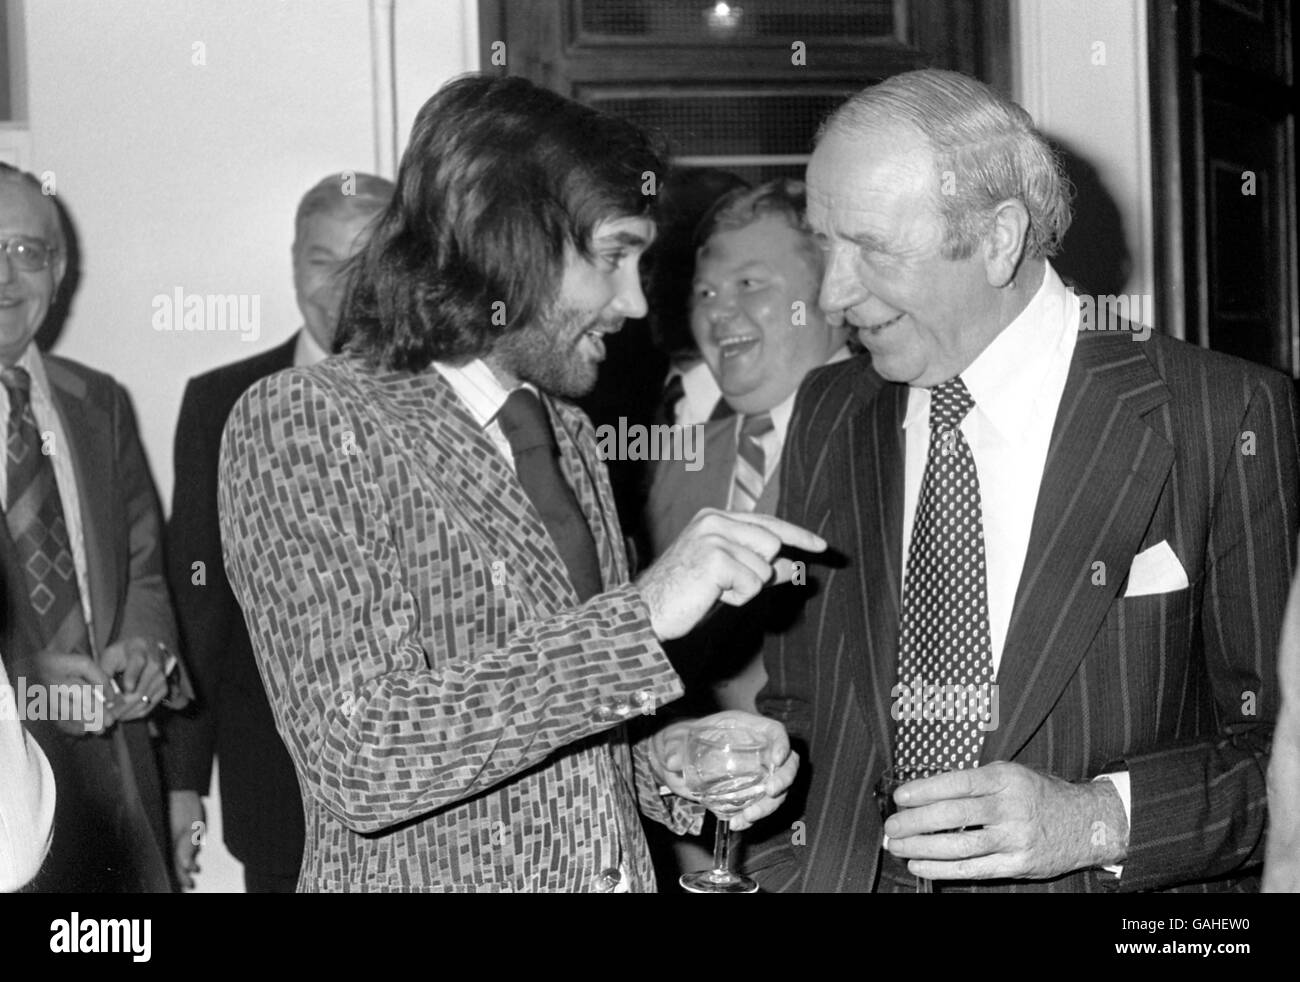 Fulham's George Best (l) chats with his mentor, Sir Matt Busby (r), as Benny Hill (c) has a laugh in the background Stock Photo